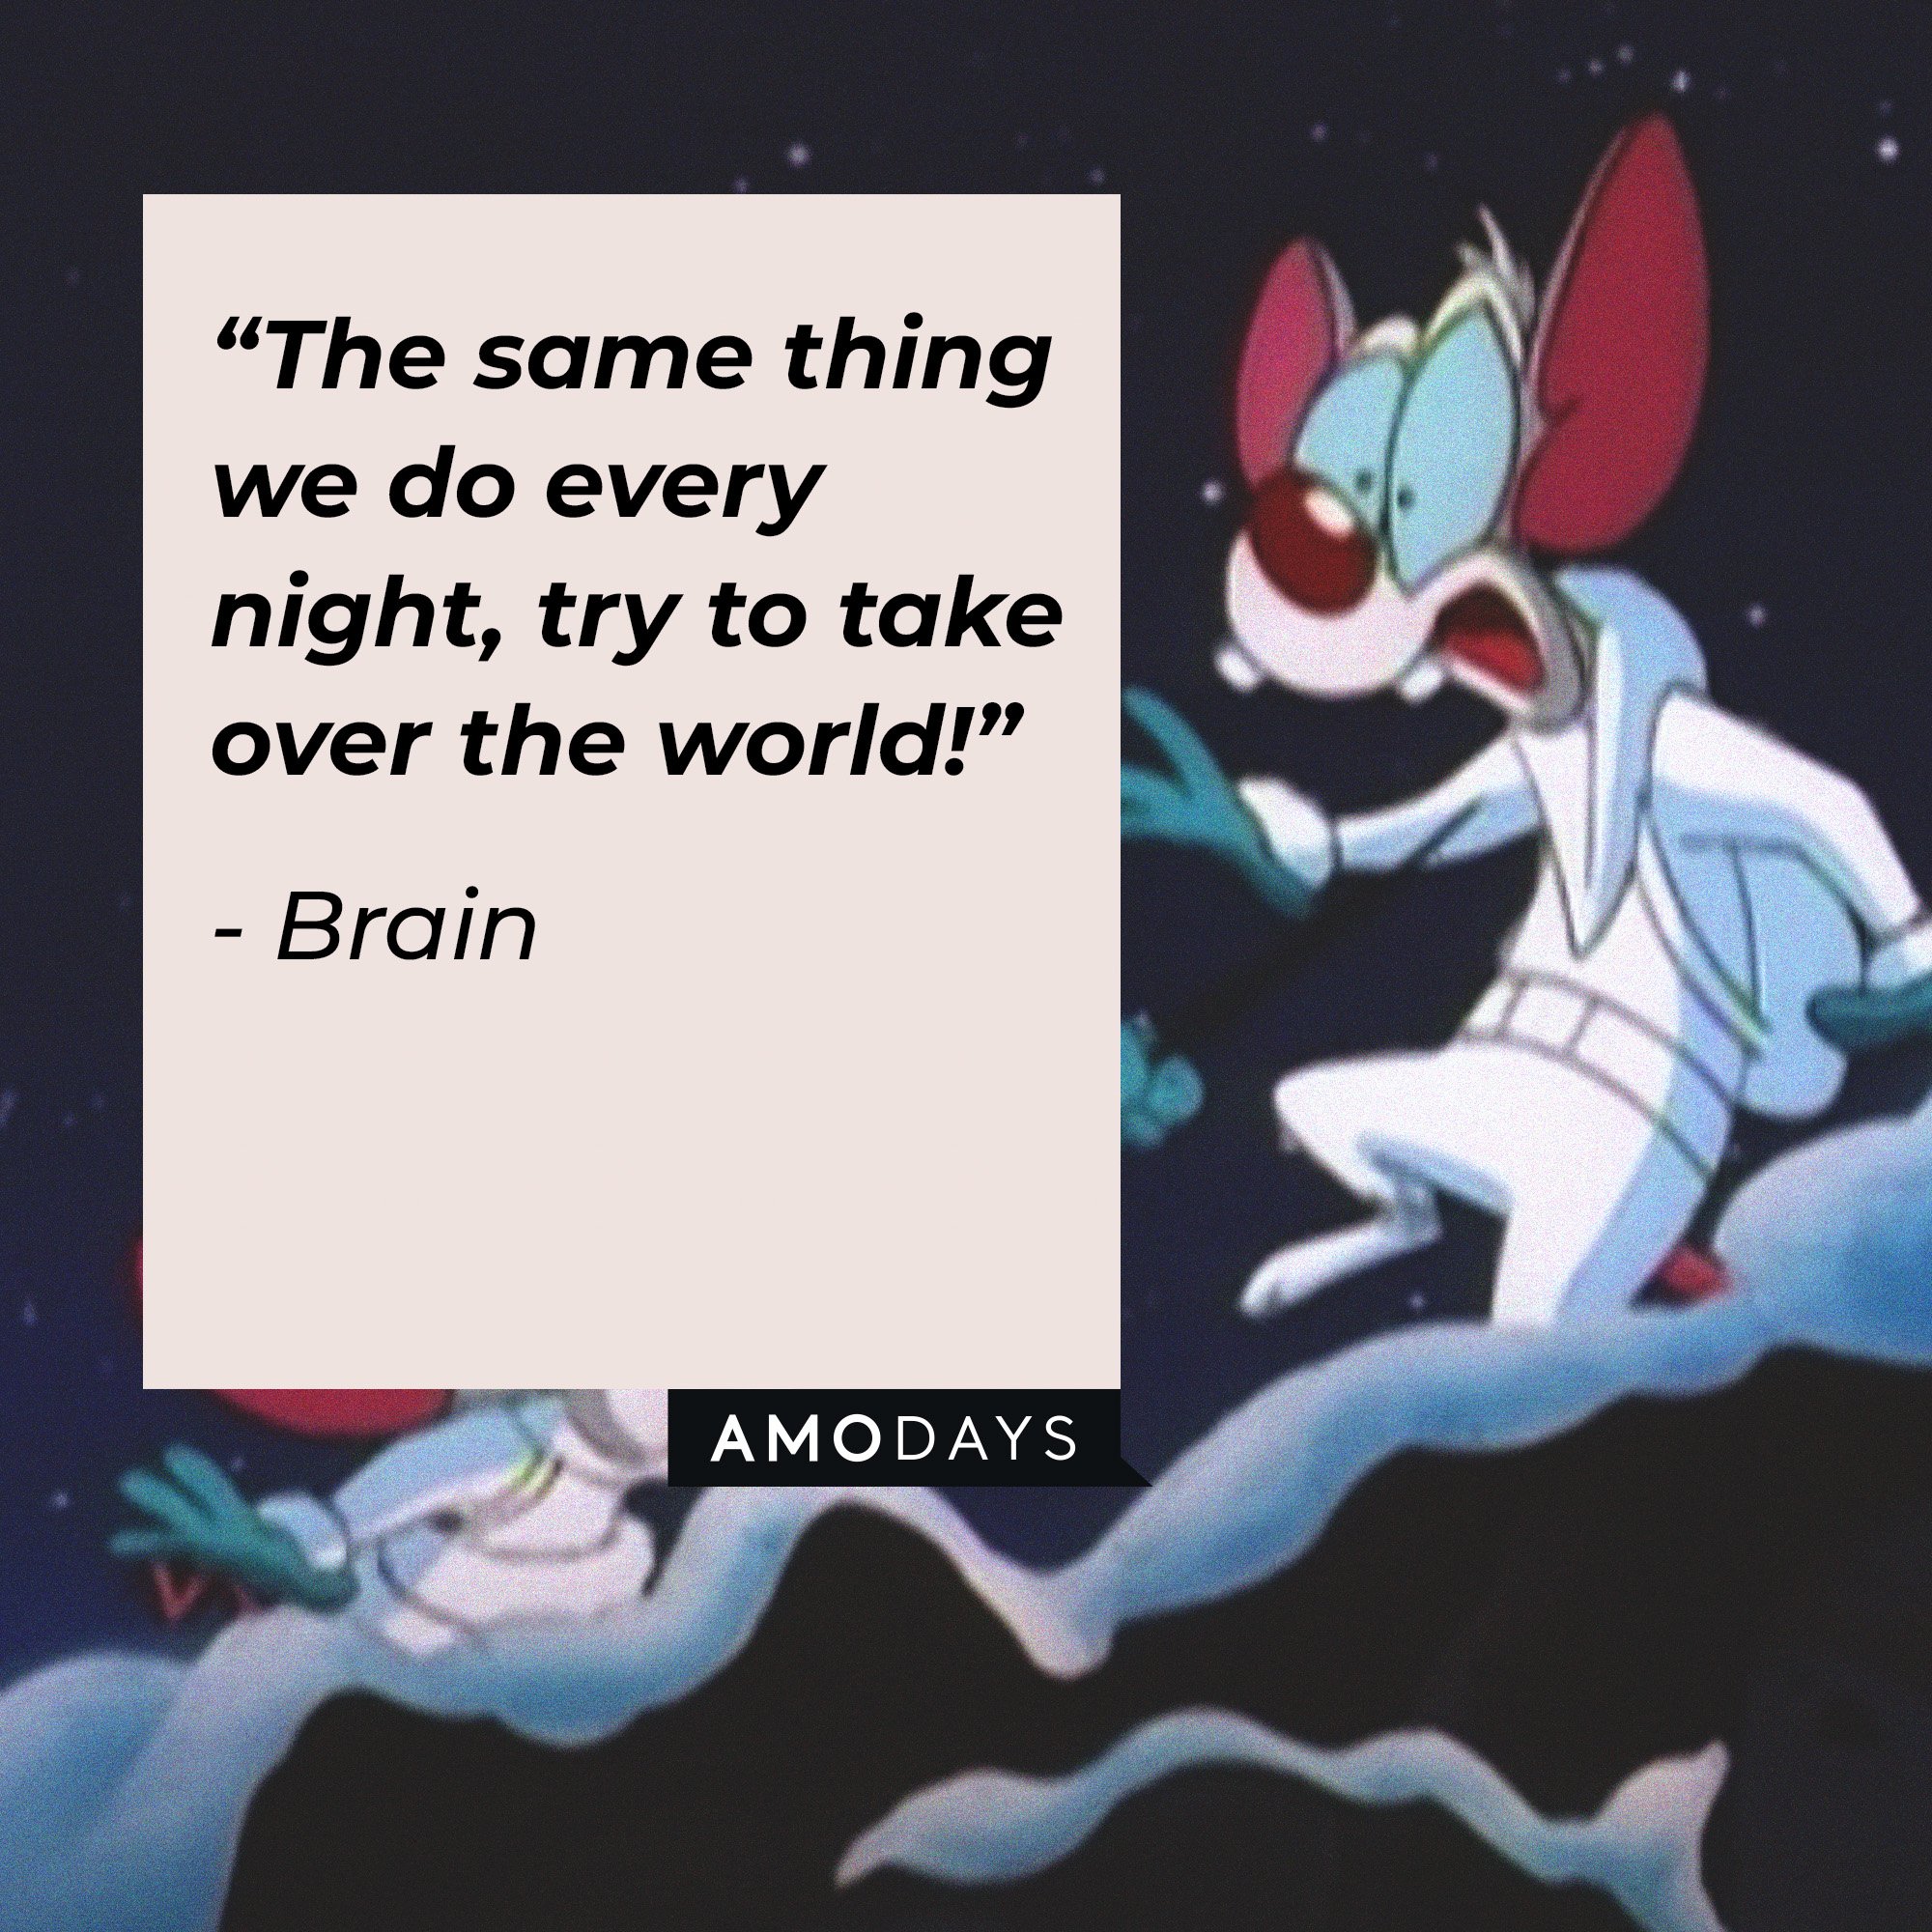  Brain's quote: “The same thing we do every night, try to take over the world!” | Image: AmoDays